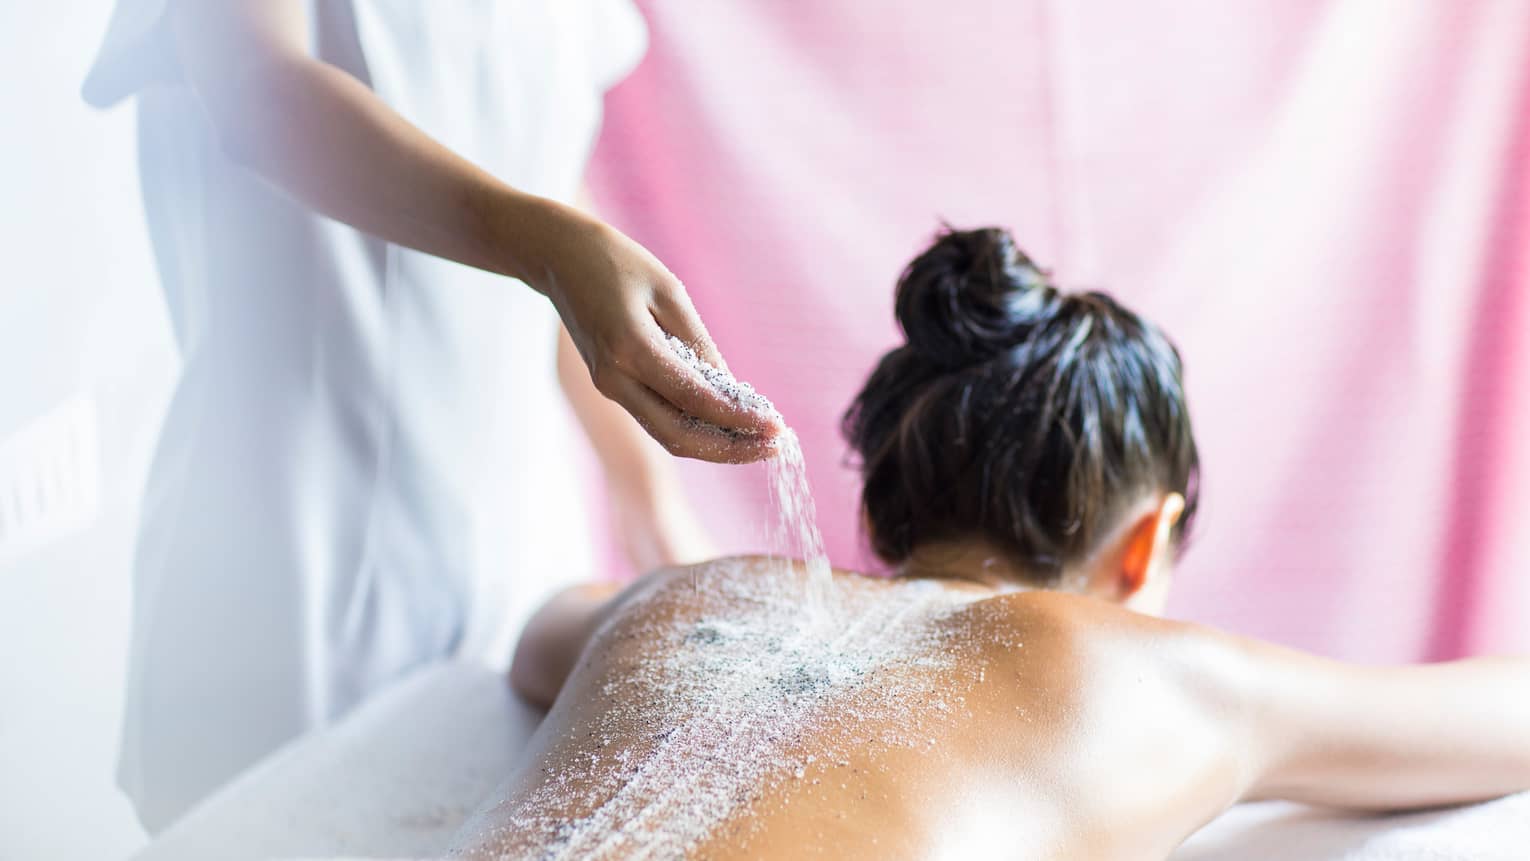 Spa staff pours salts, sand over woman's bare back as she lies on treatment room table